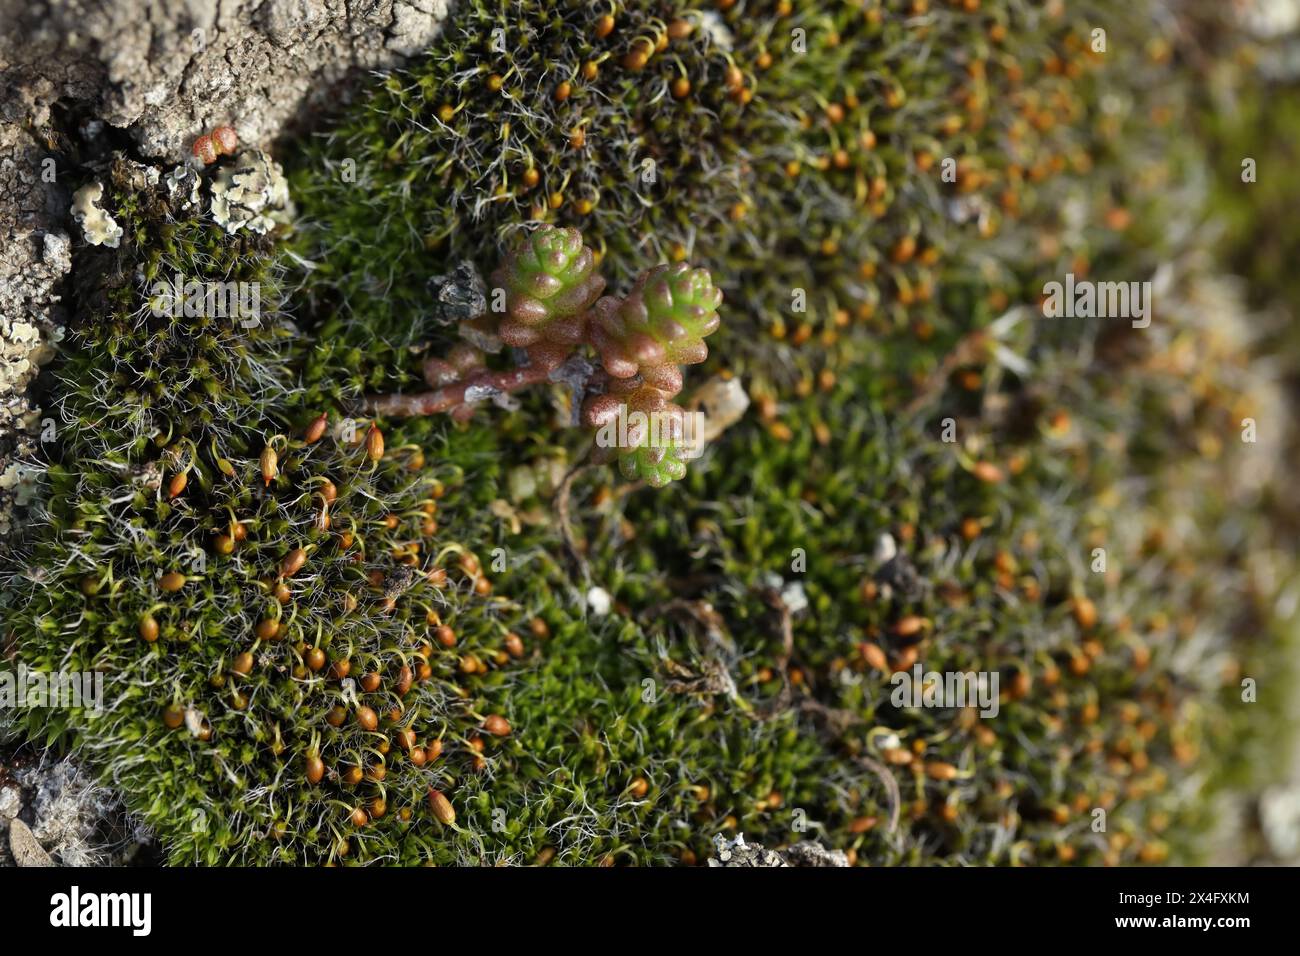 Sedum plant on the stone with moss in spring time Stock Photo